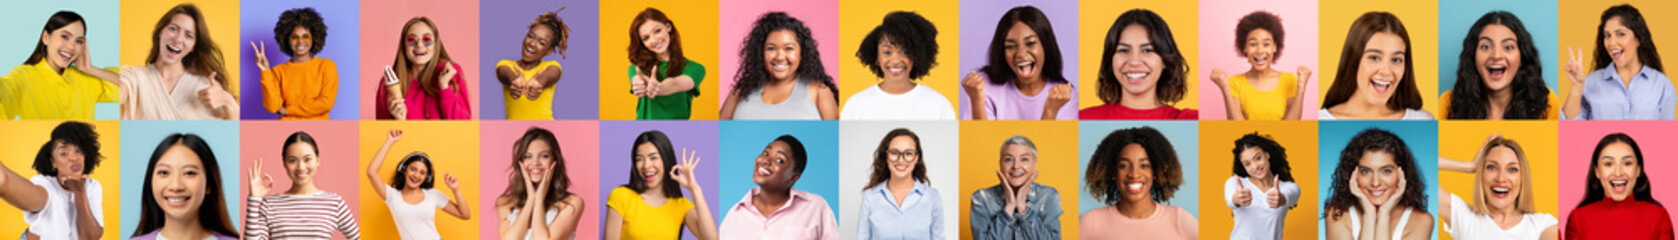 Diverse group of women expressing emotions on colorful background